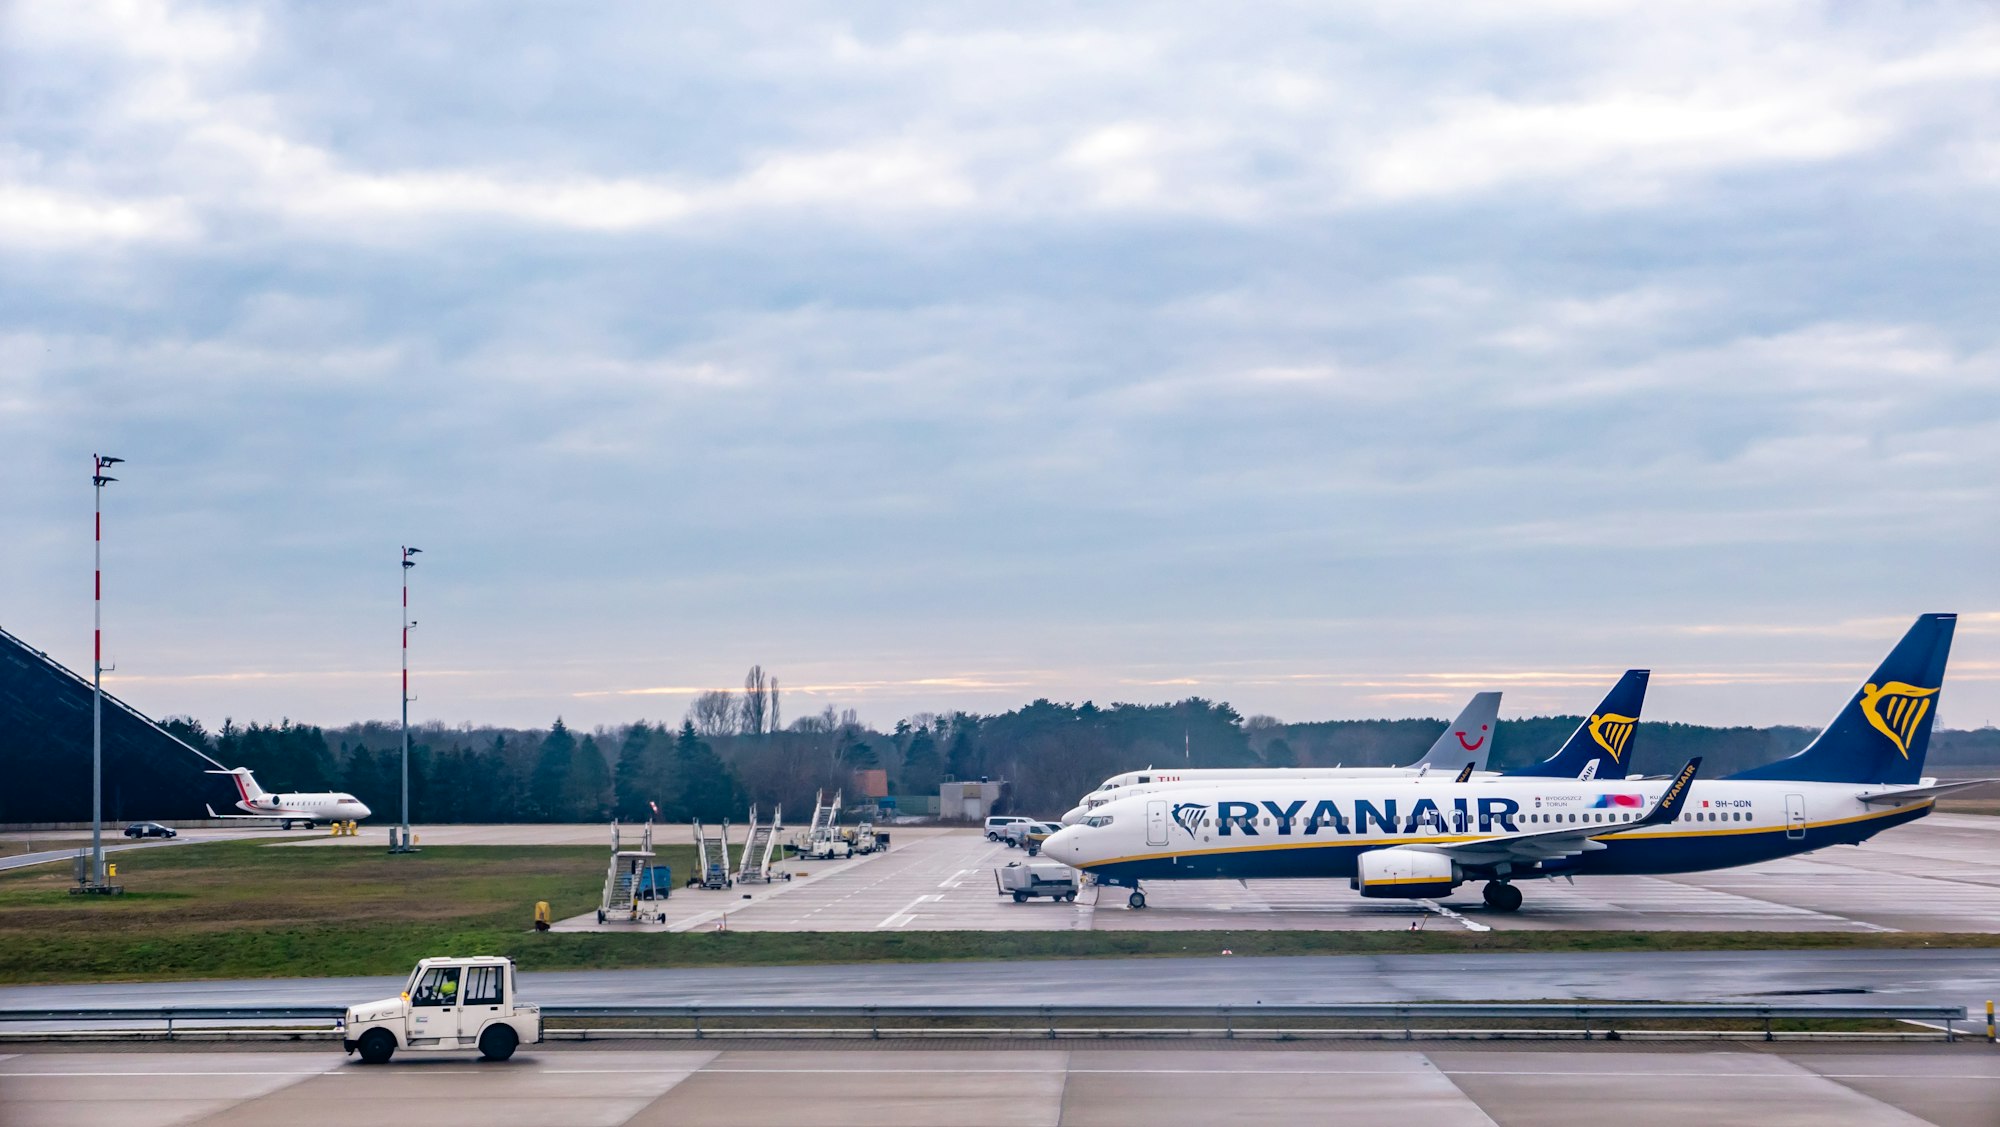 Ryanair Announces Winter 23/24 Schedule with Expanded Service at Prague Airport